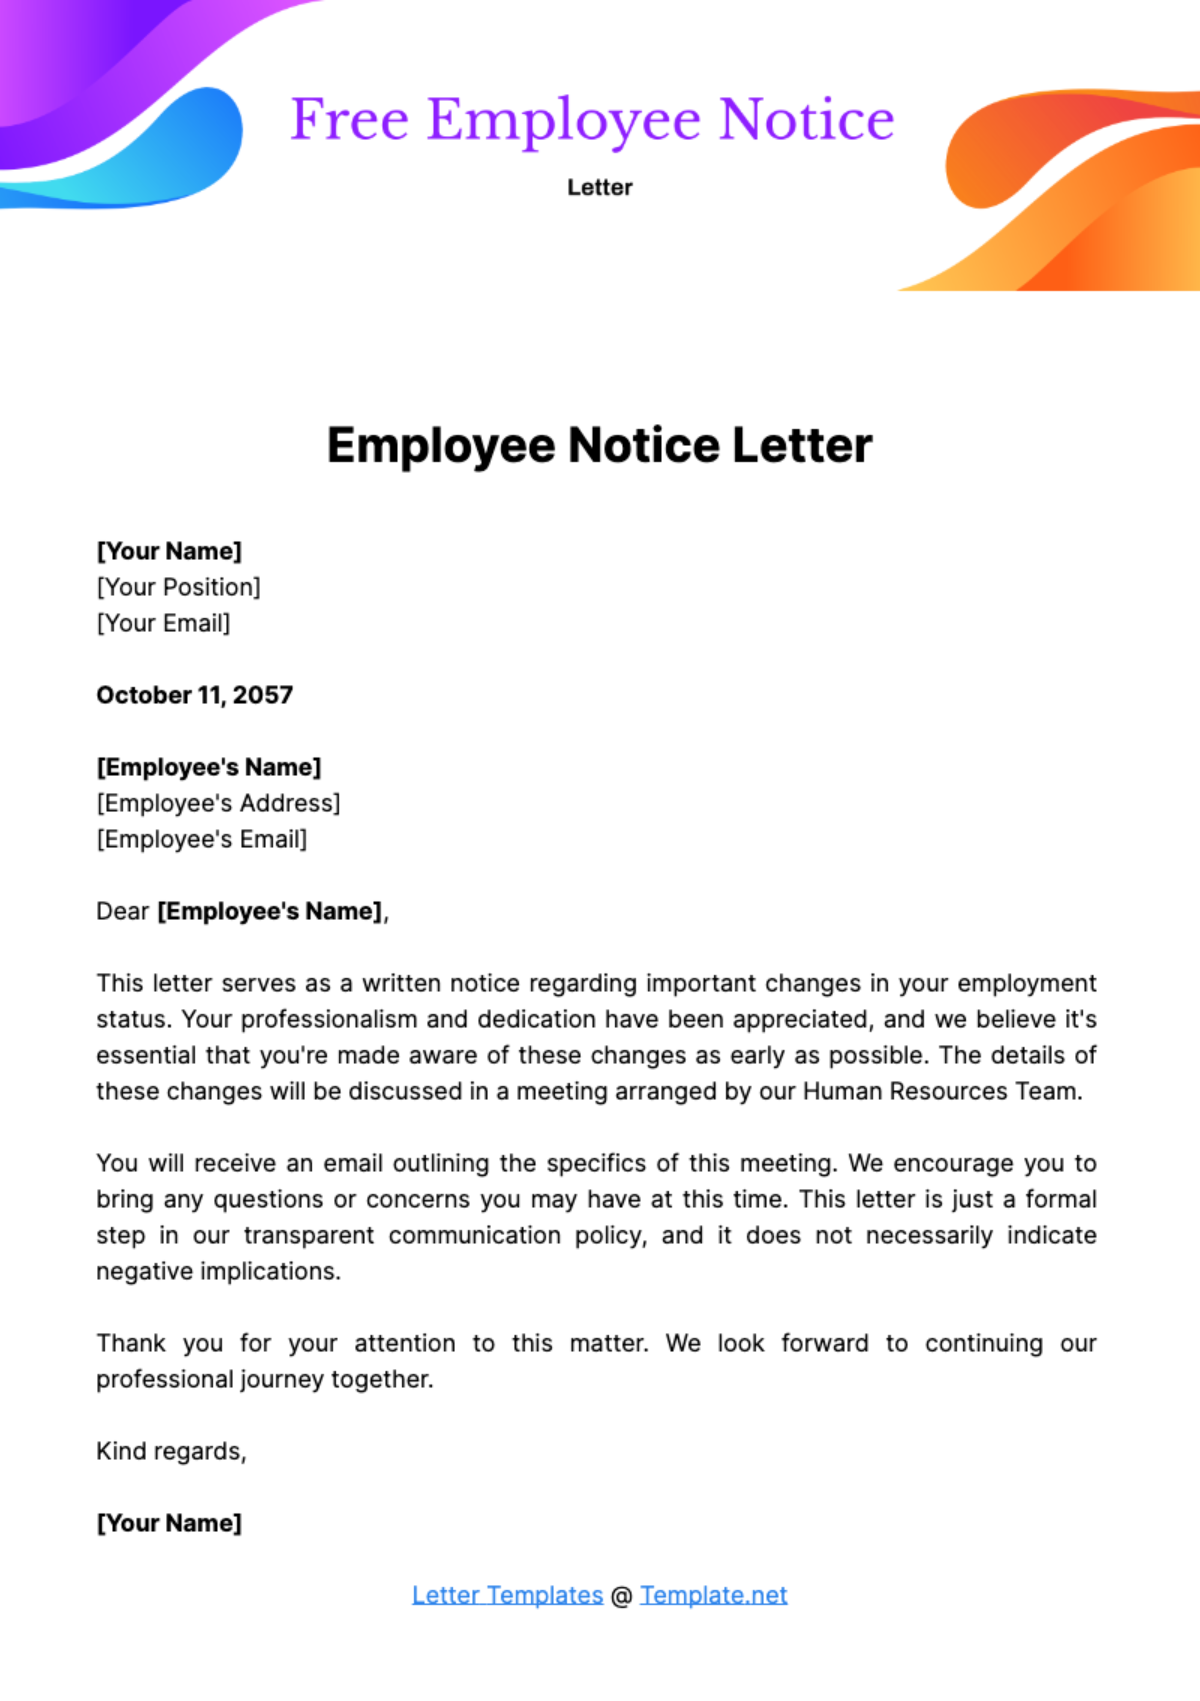 Free Employee Notice Letter Template